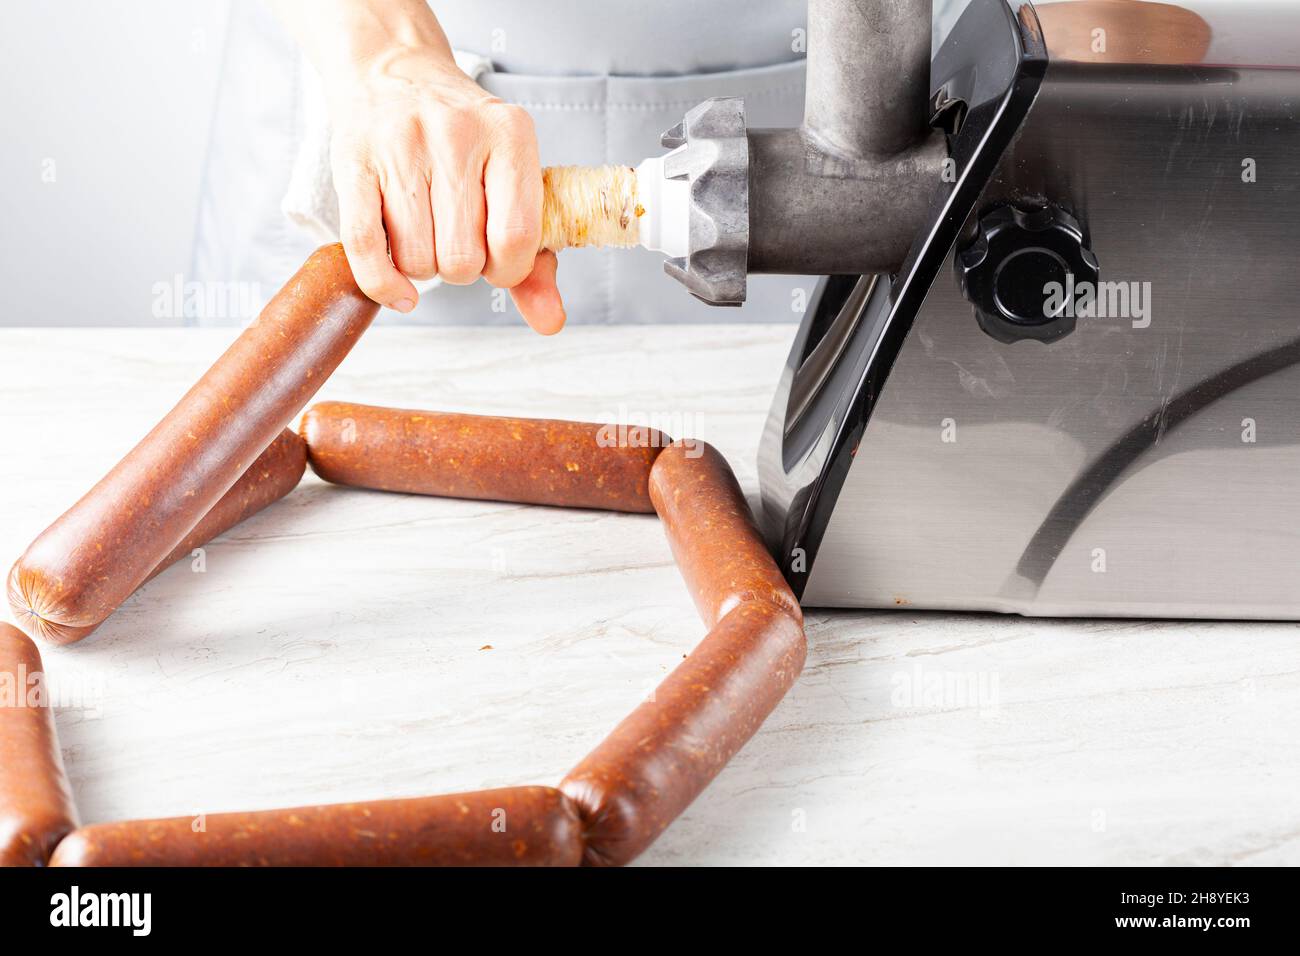 a woman cook wearing apron is stuffing homemade sucuk or sausage into casing using an electrical meat grinder and stuffer. This is an healthier preser Stock Photo